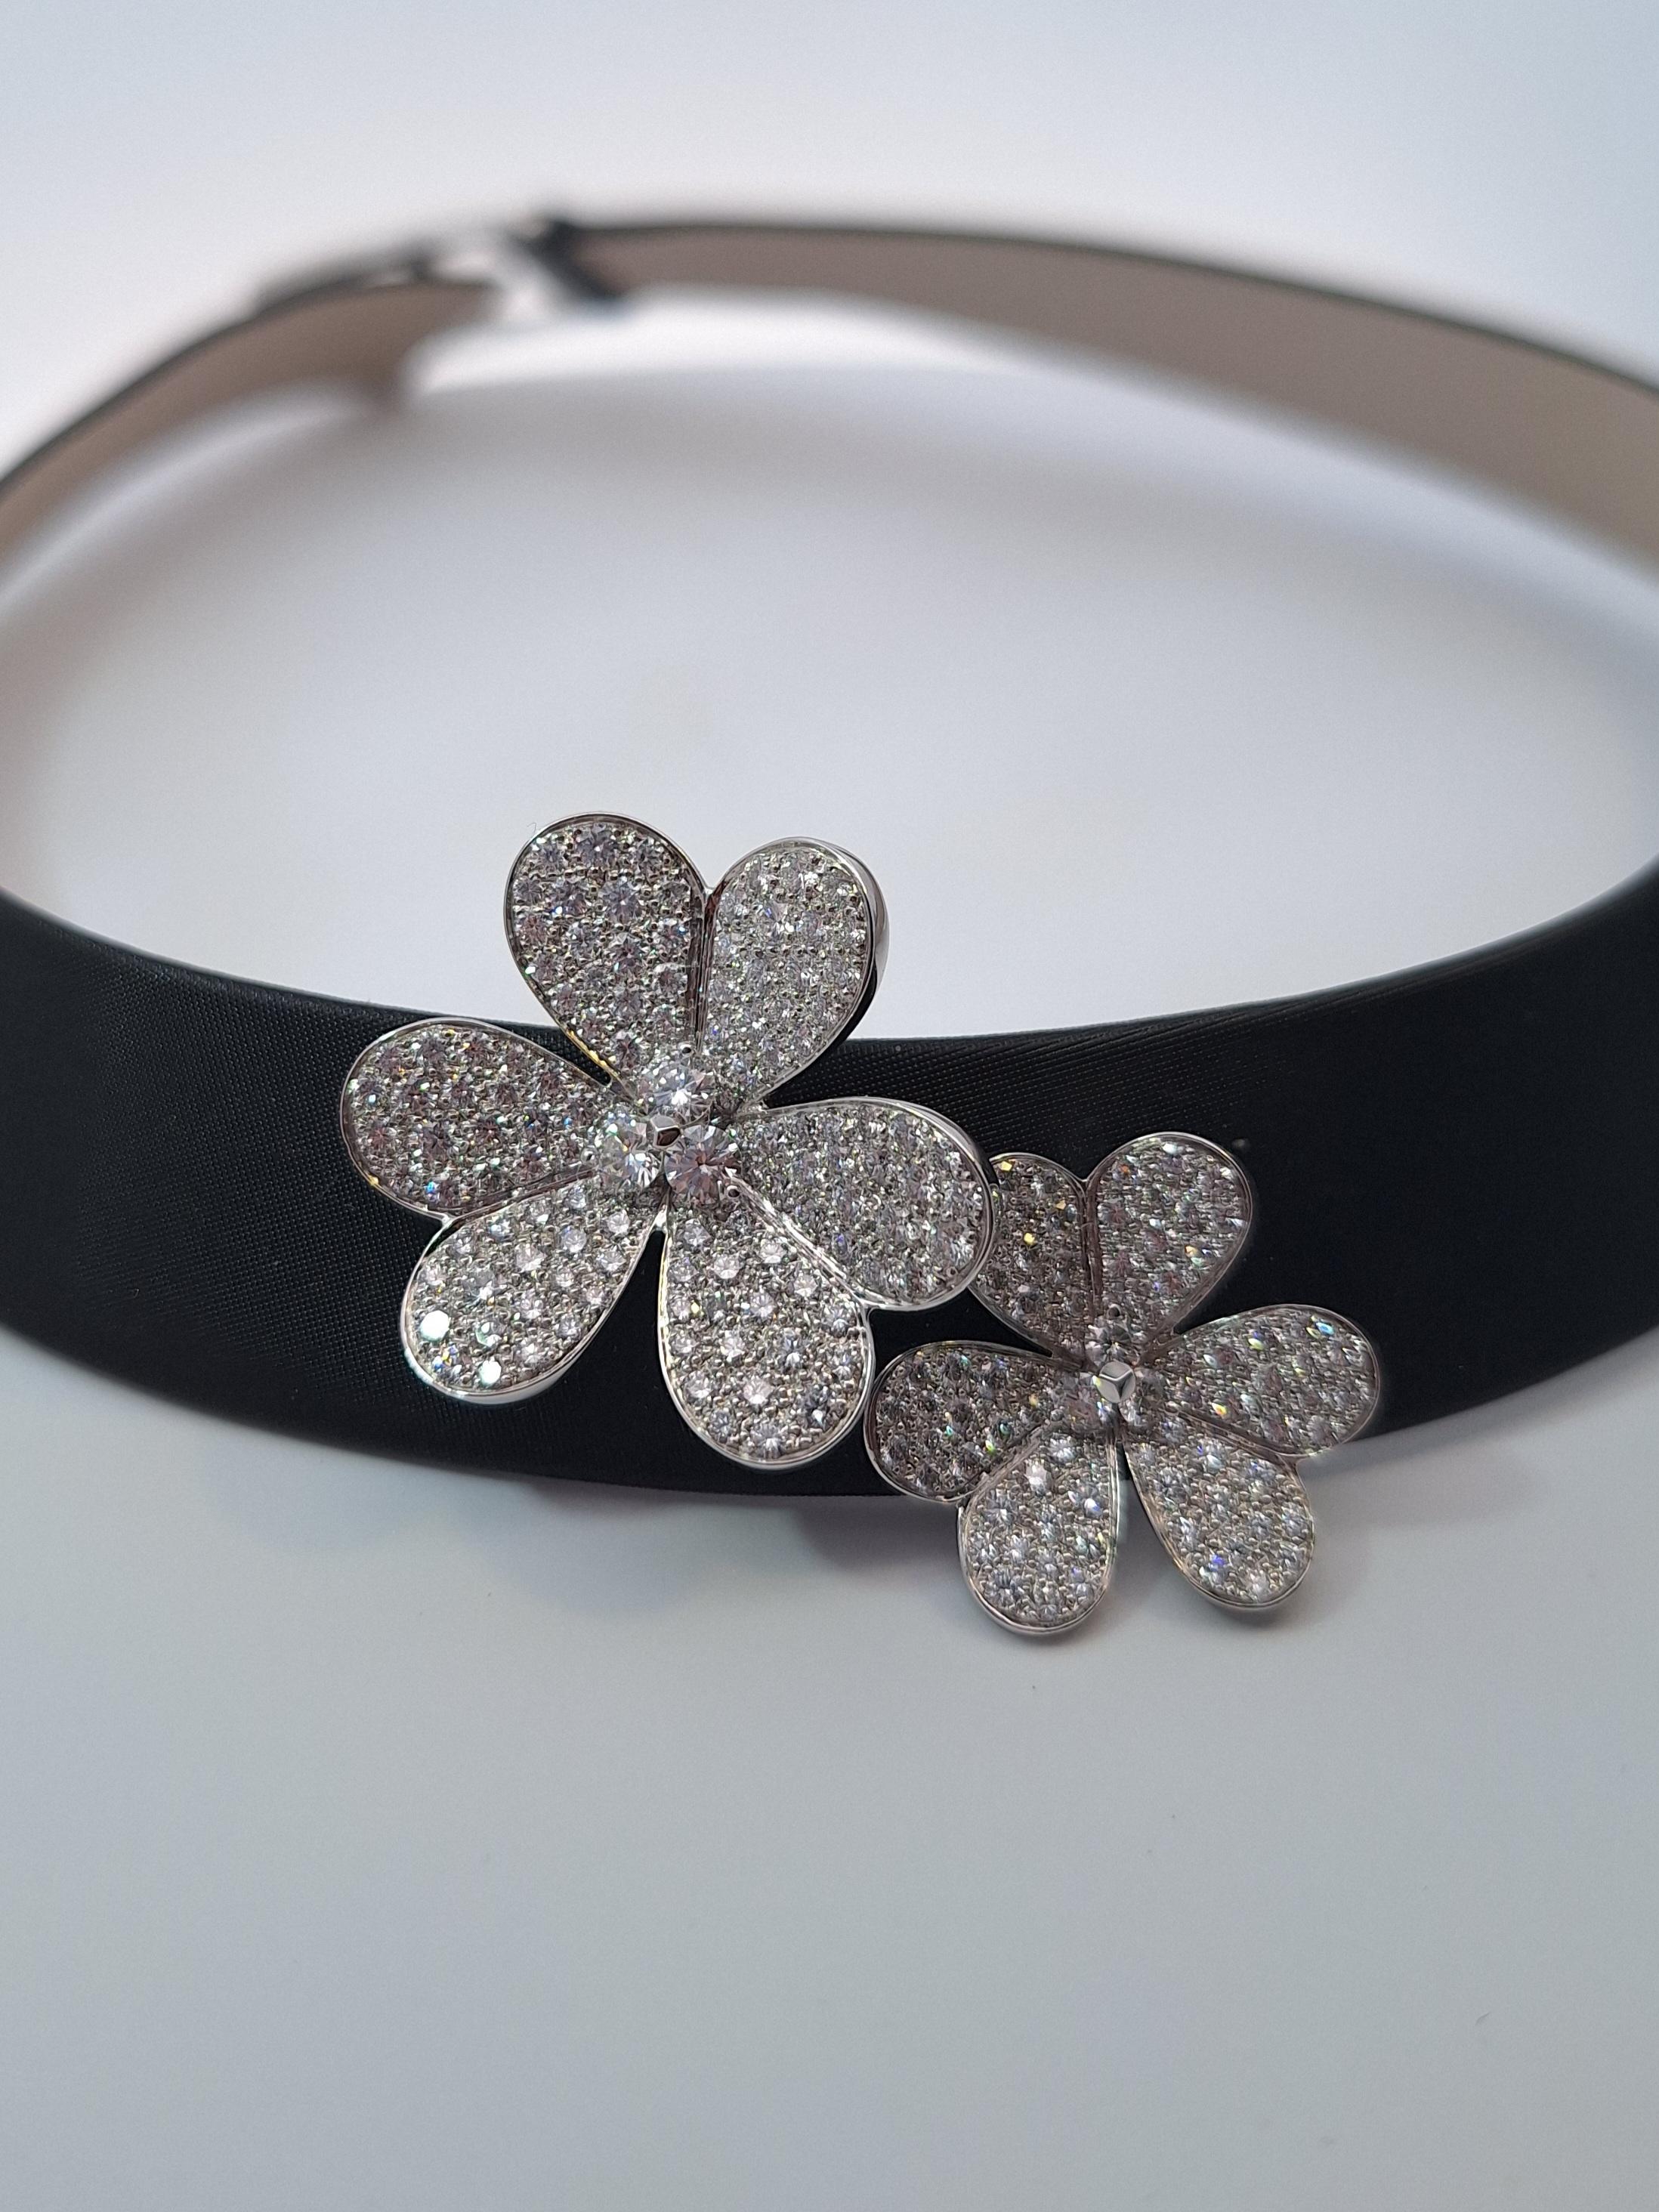 Van Cleef & Arpels Frivole Diamond Choker Necklace and Bracelet Set In Excellent Condition For Sale In New York, NY